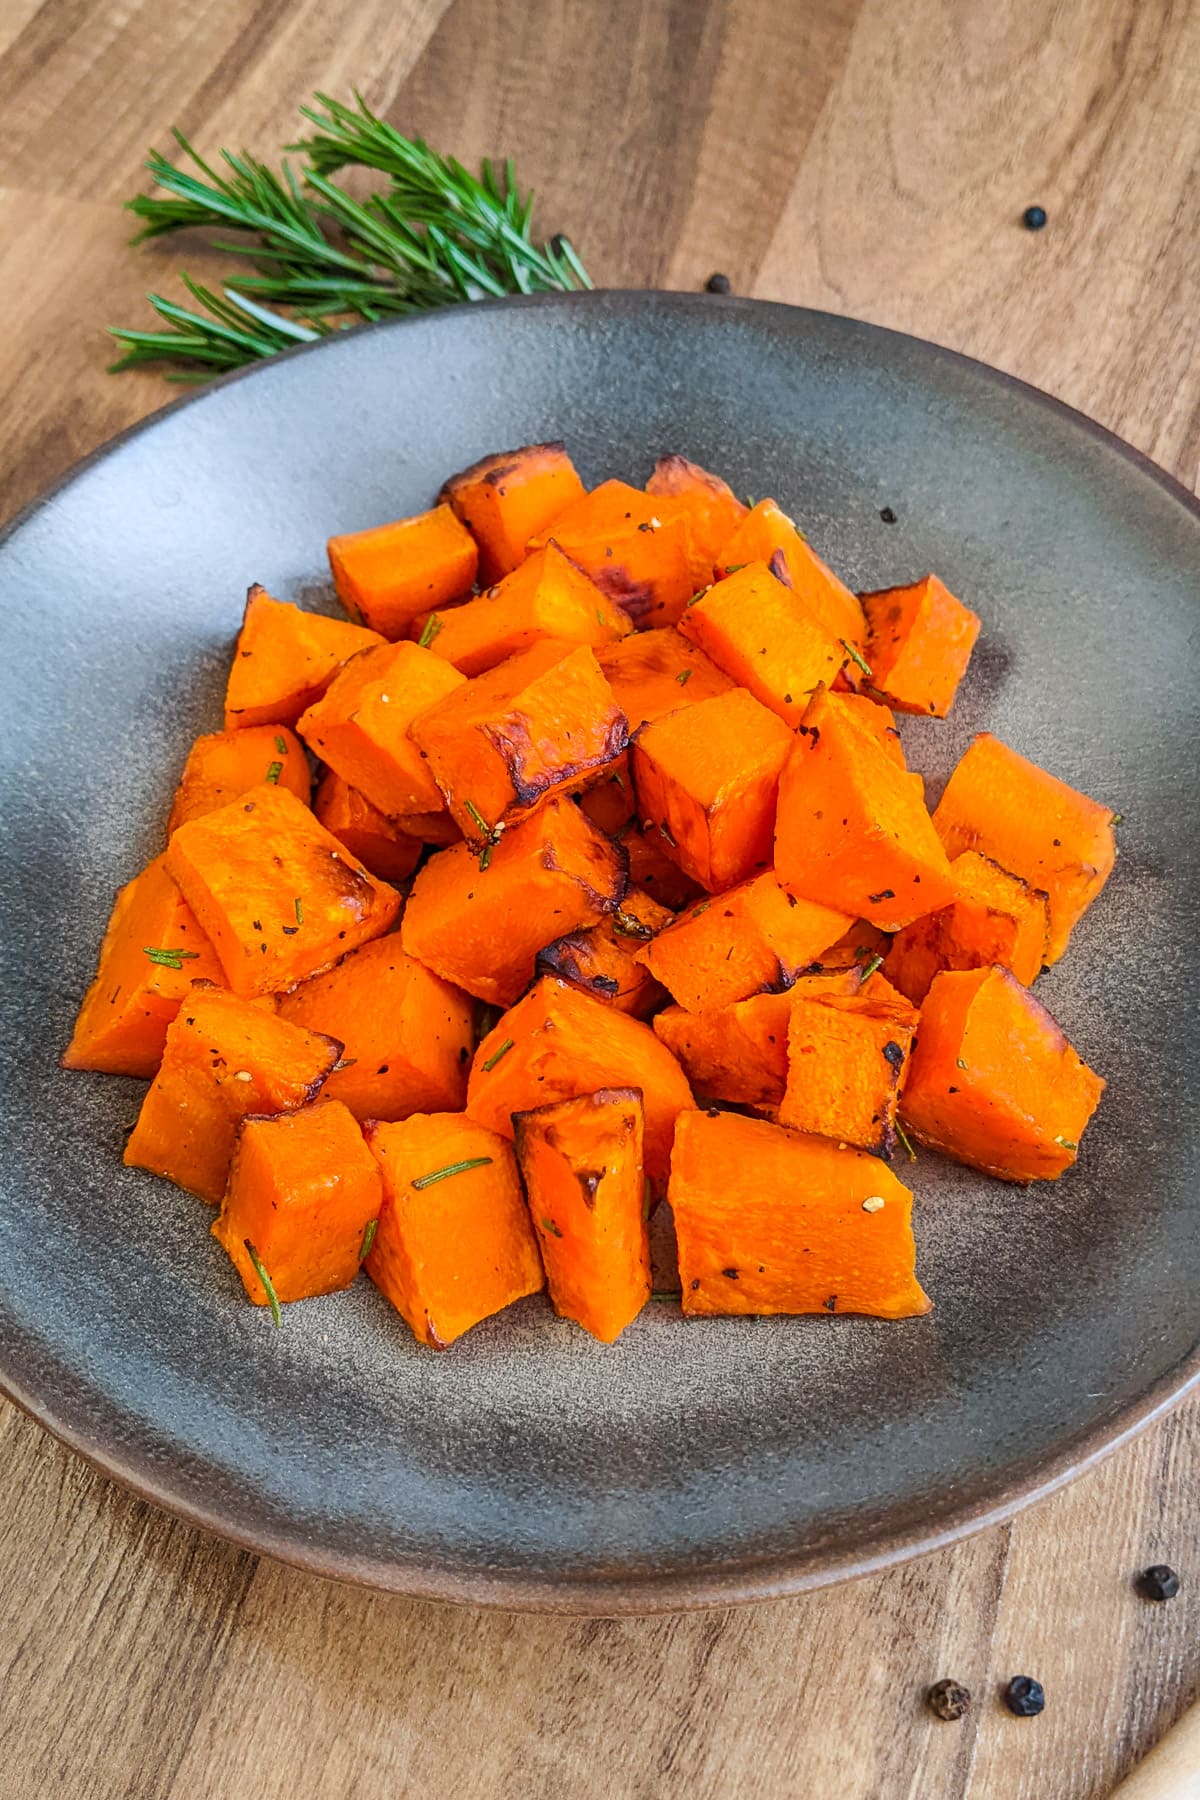 A plate with butternut squash on a wooden plate.